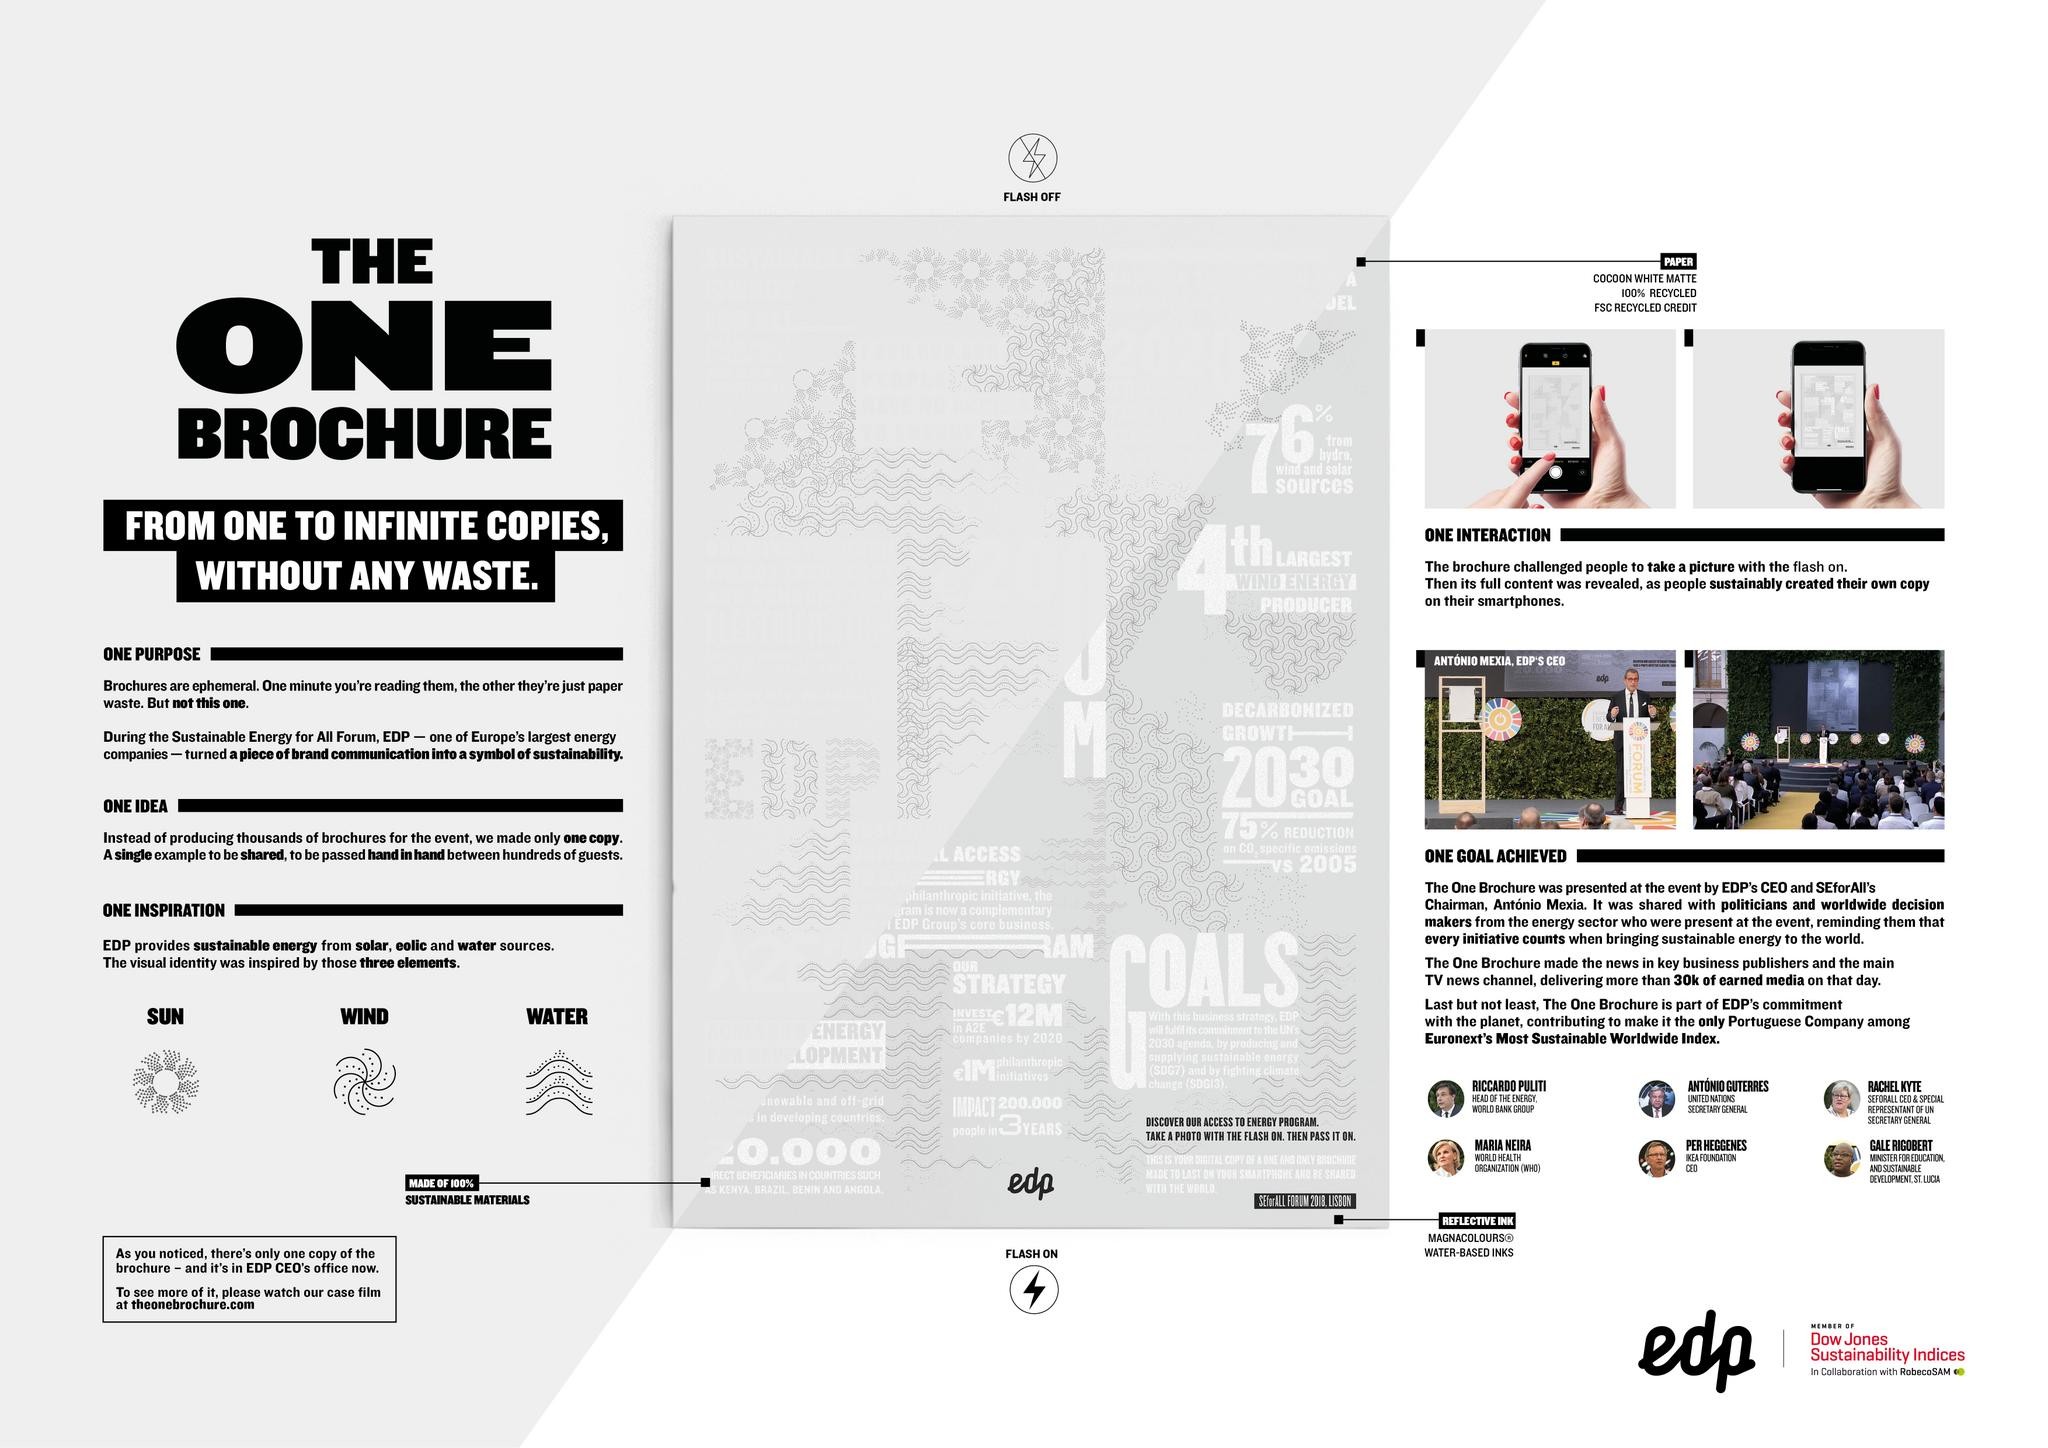 The One Brochure